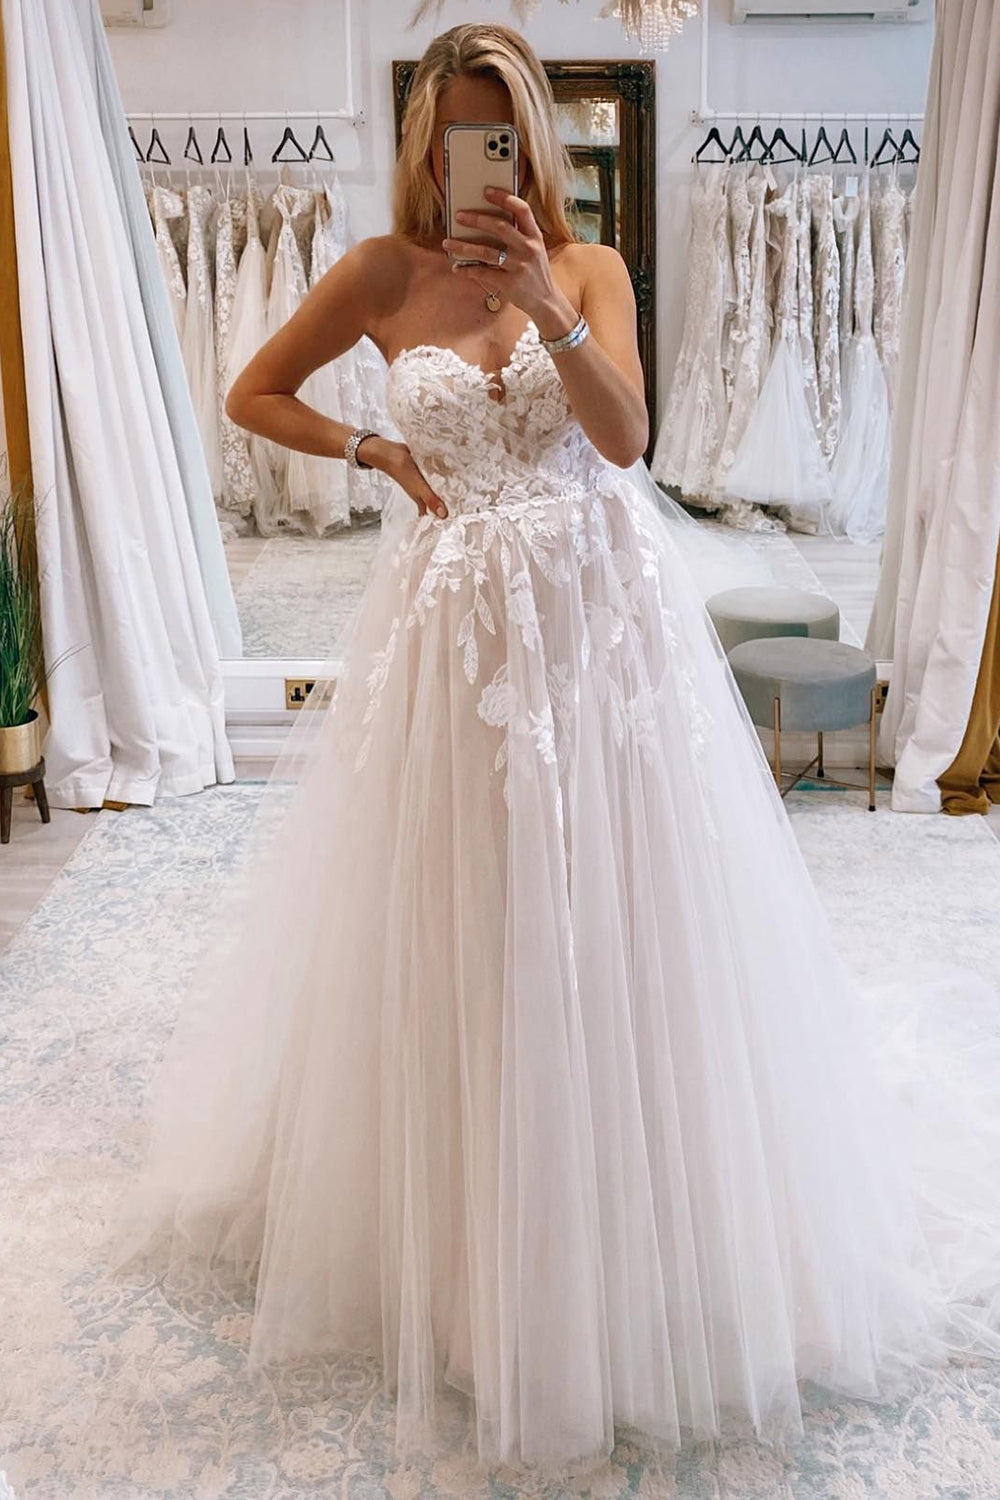 Ivory Long Tulle A-Line Wedding Dress with Lace